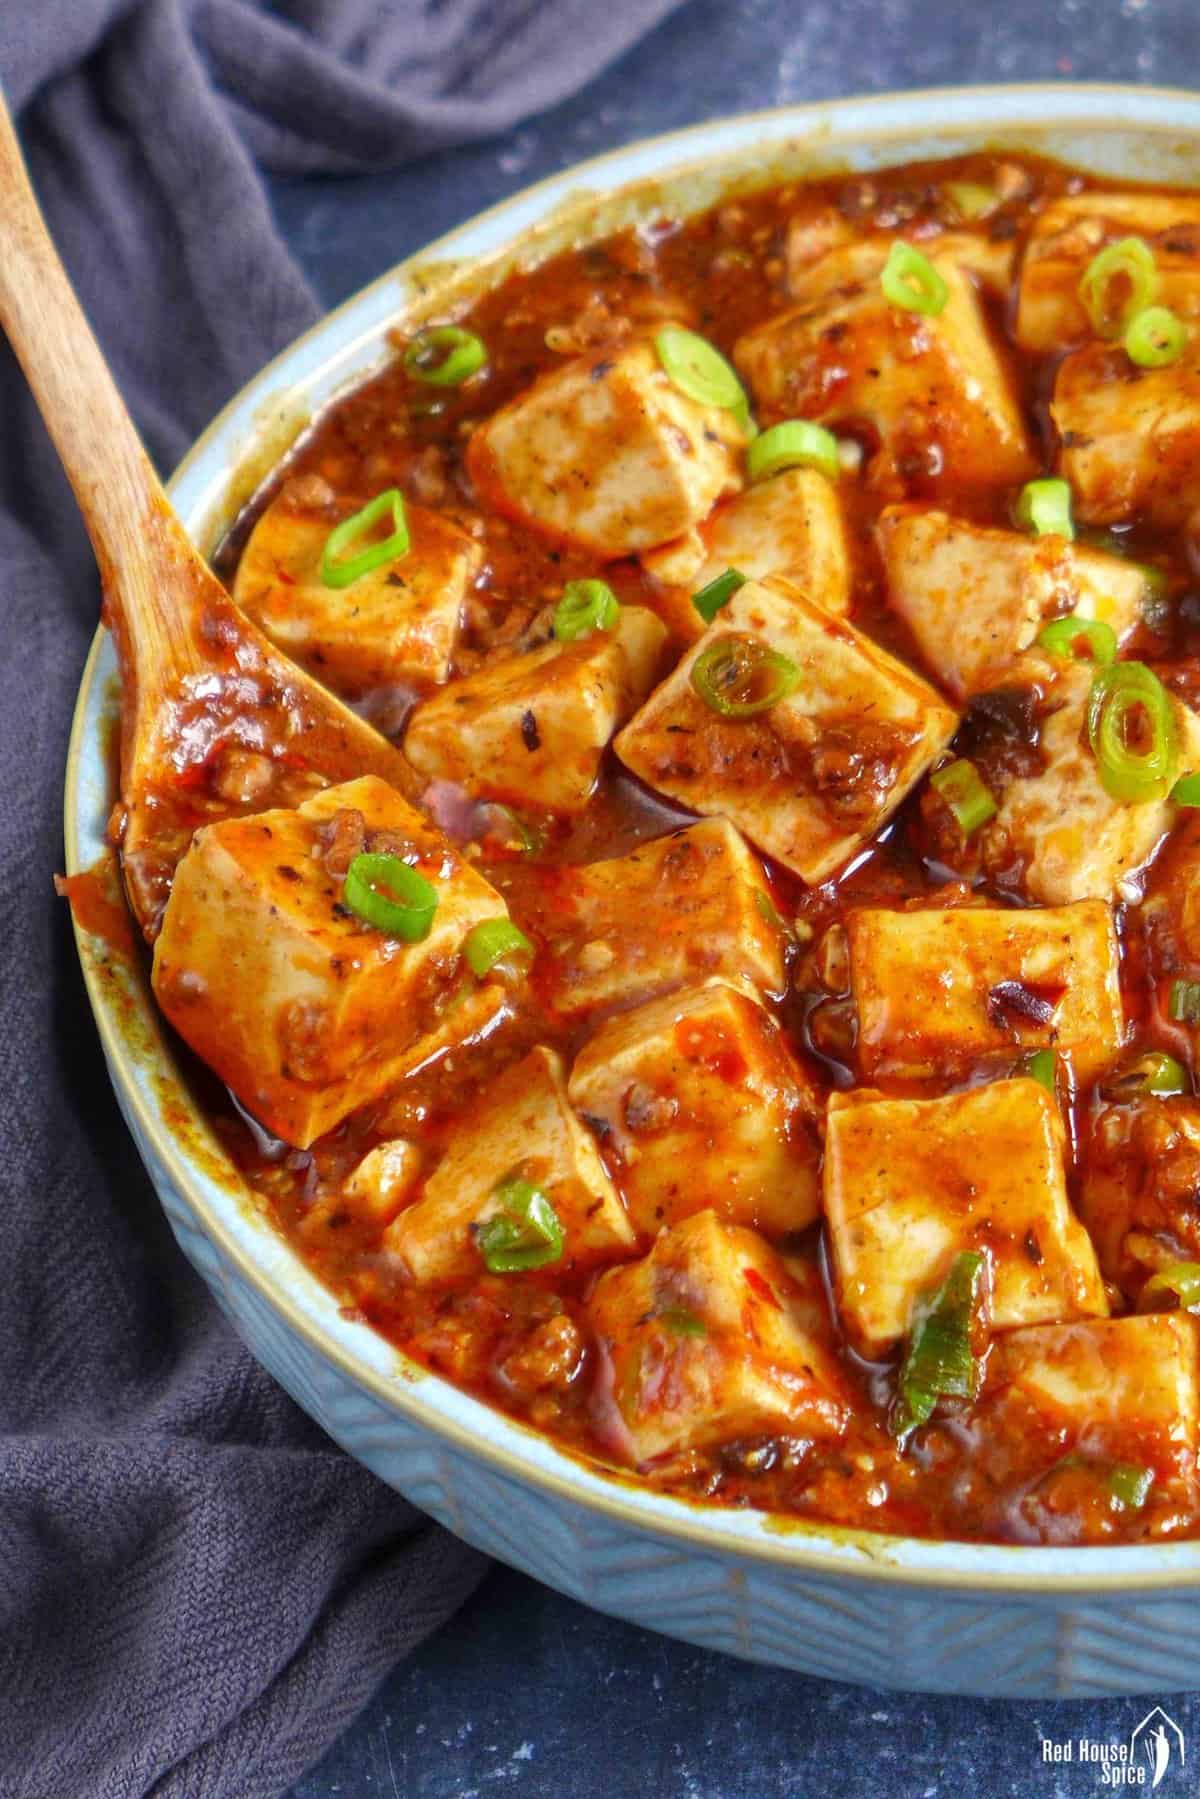 spooning out one piece of Mapo tofu